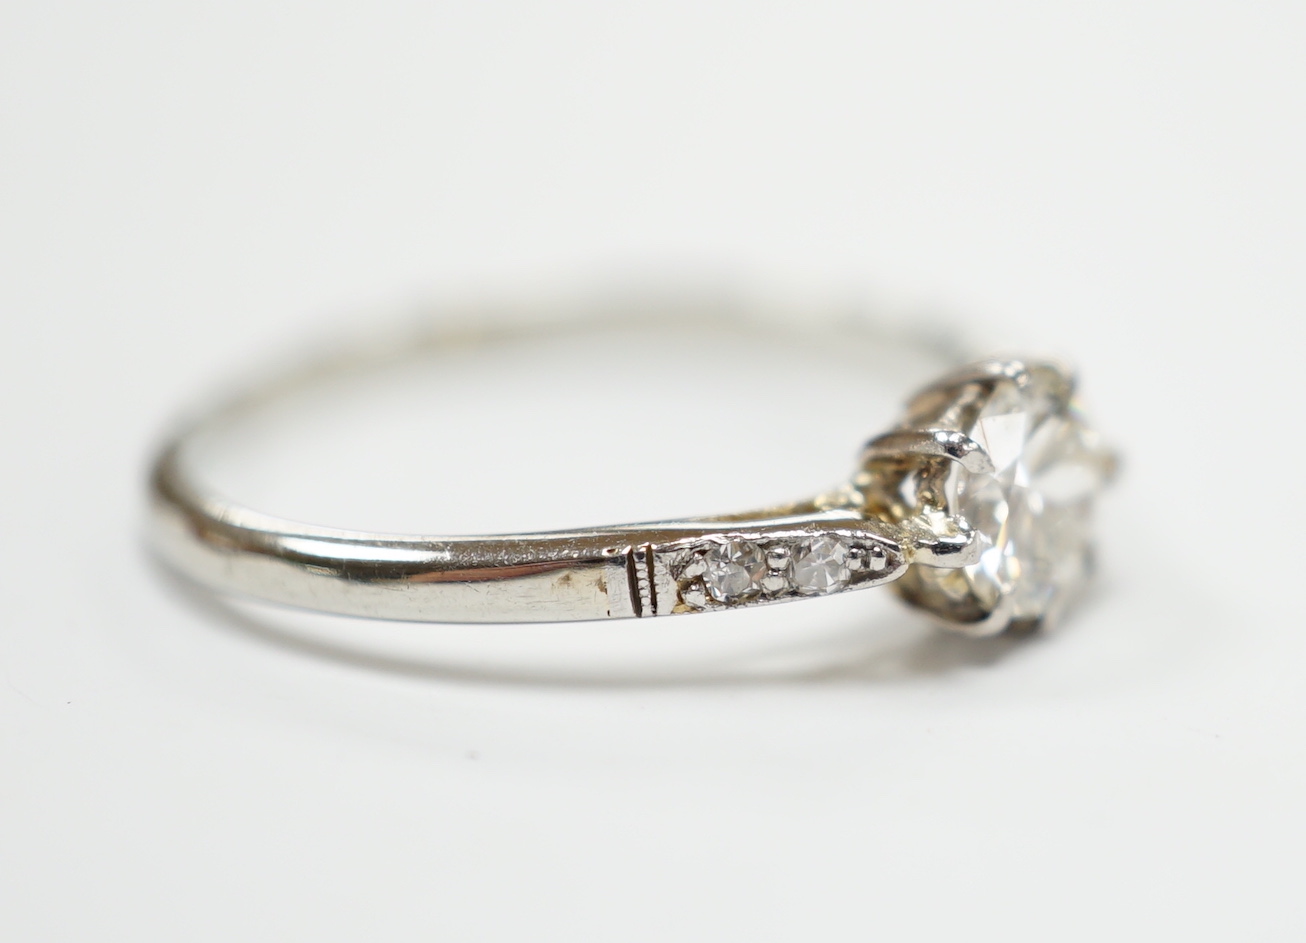 An 18ct, plat. and single stone diamond ring, with diamond set shoulders, size M/N, gross weight 1.9 grams.